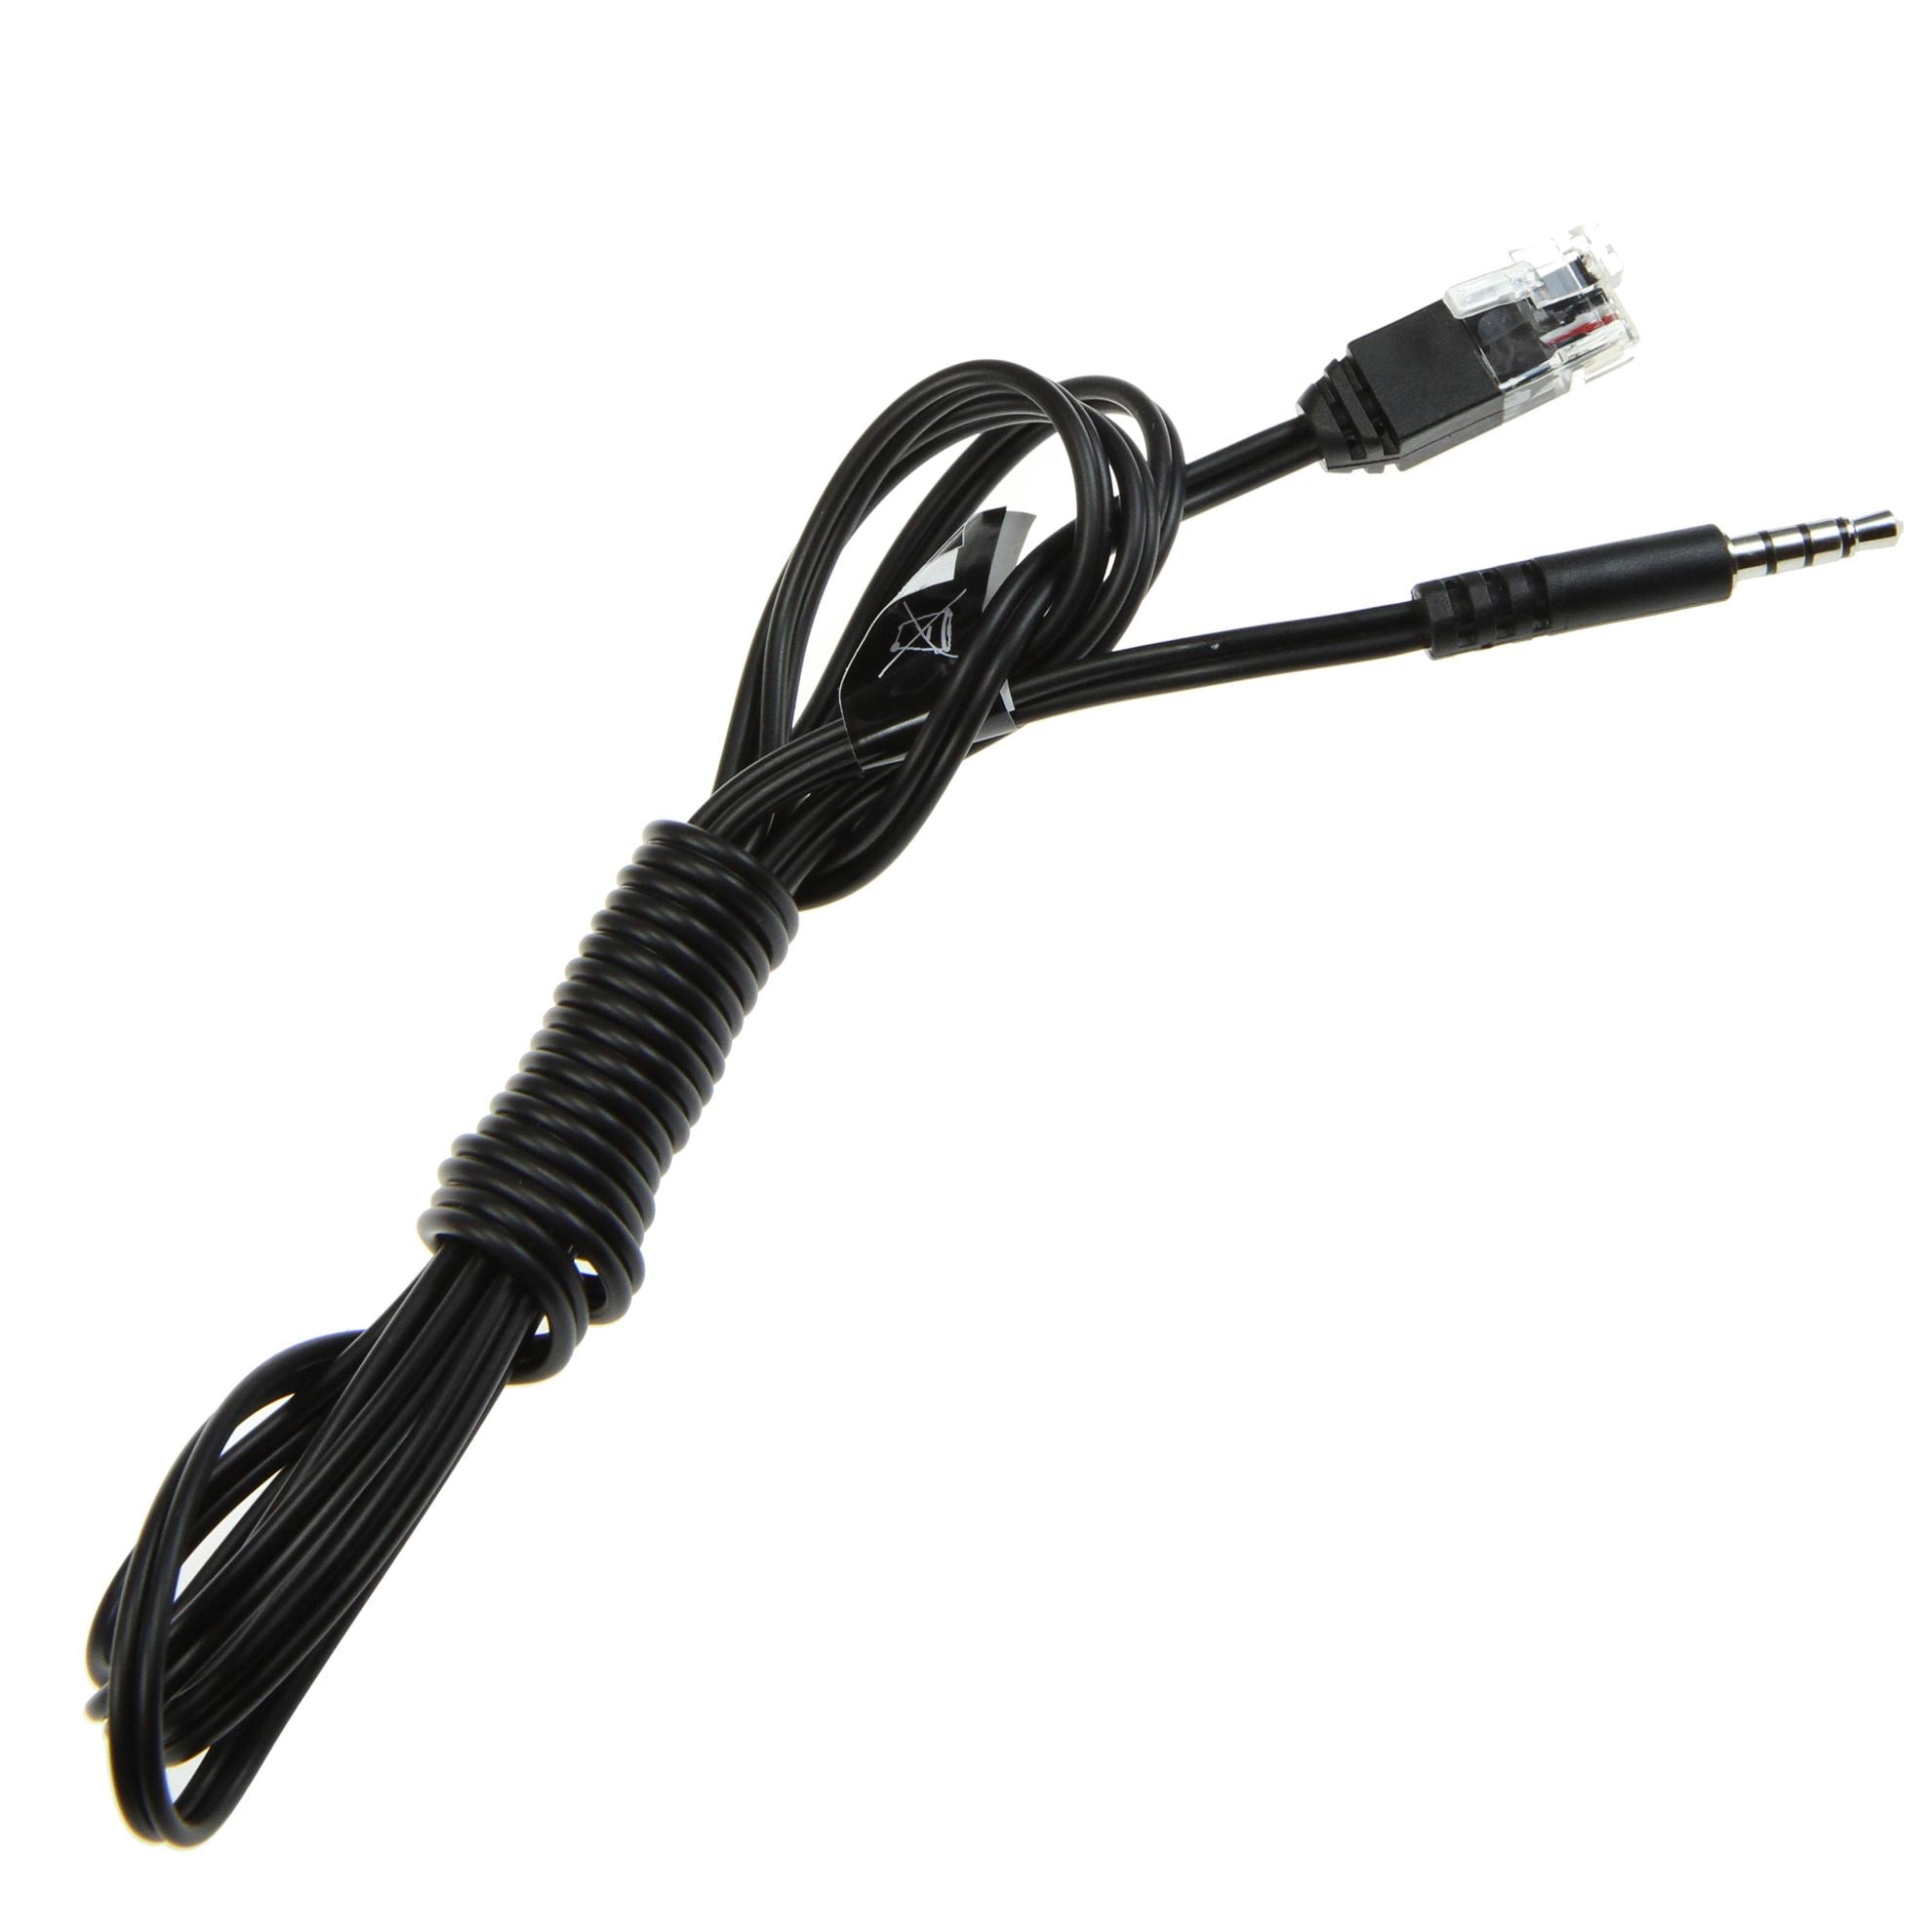 KONFTEL_1.5M_USB-A_2.0_Cable_to_Connect_to_PC_for_VoIP_calls.